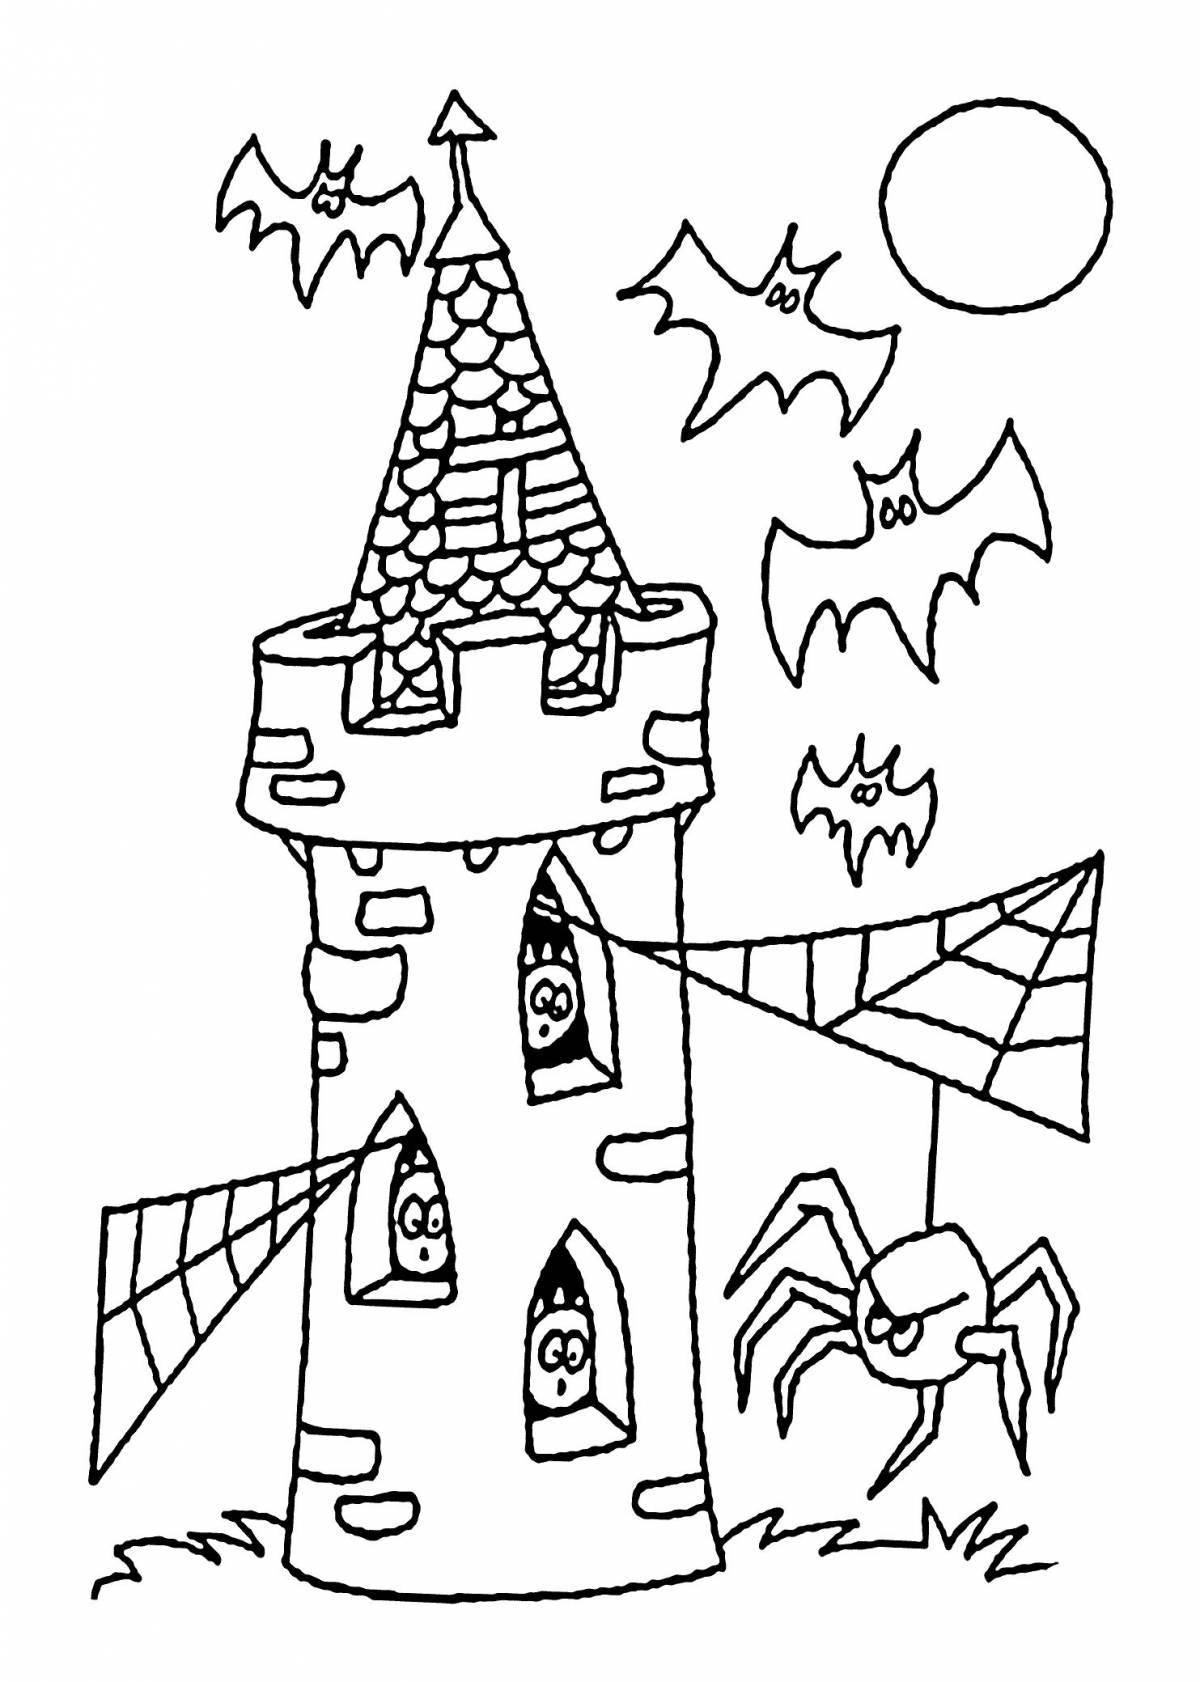 Chilling halloween house coloring page